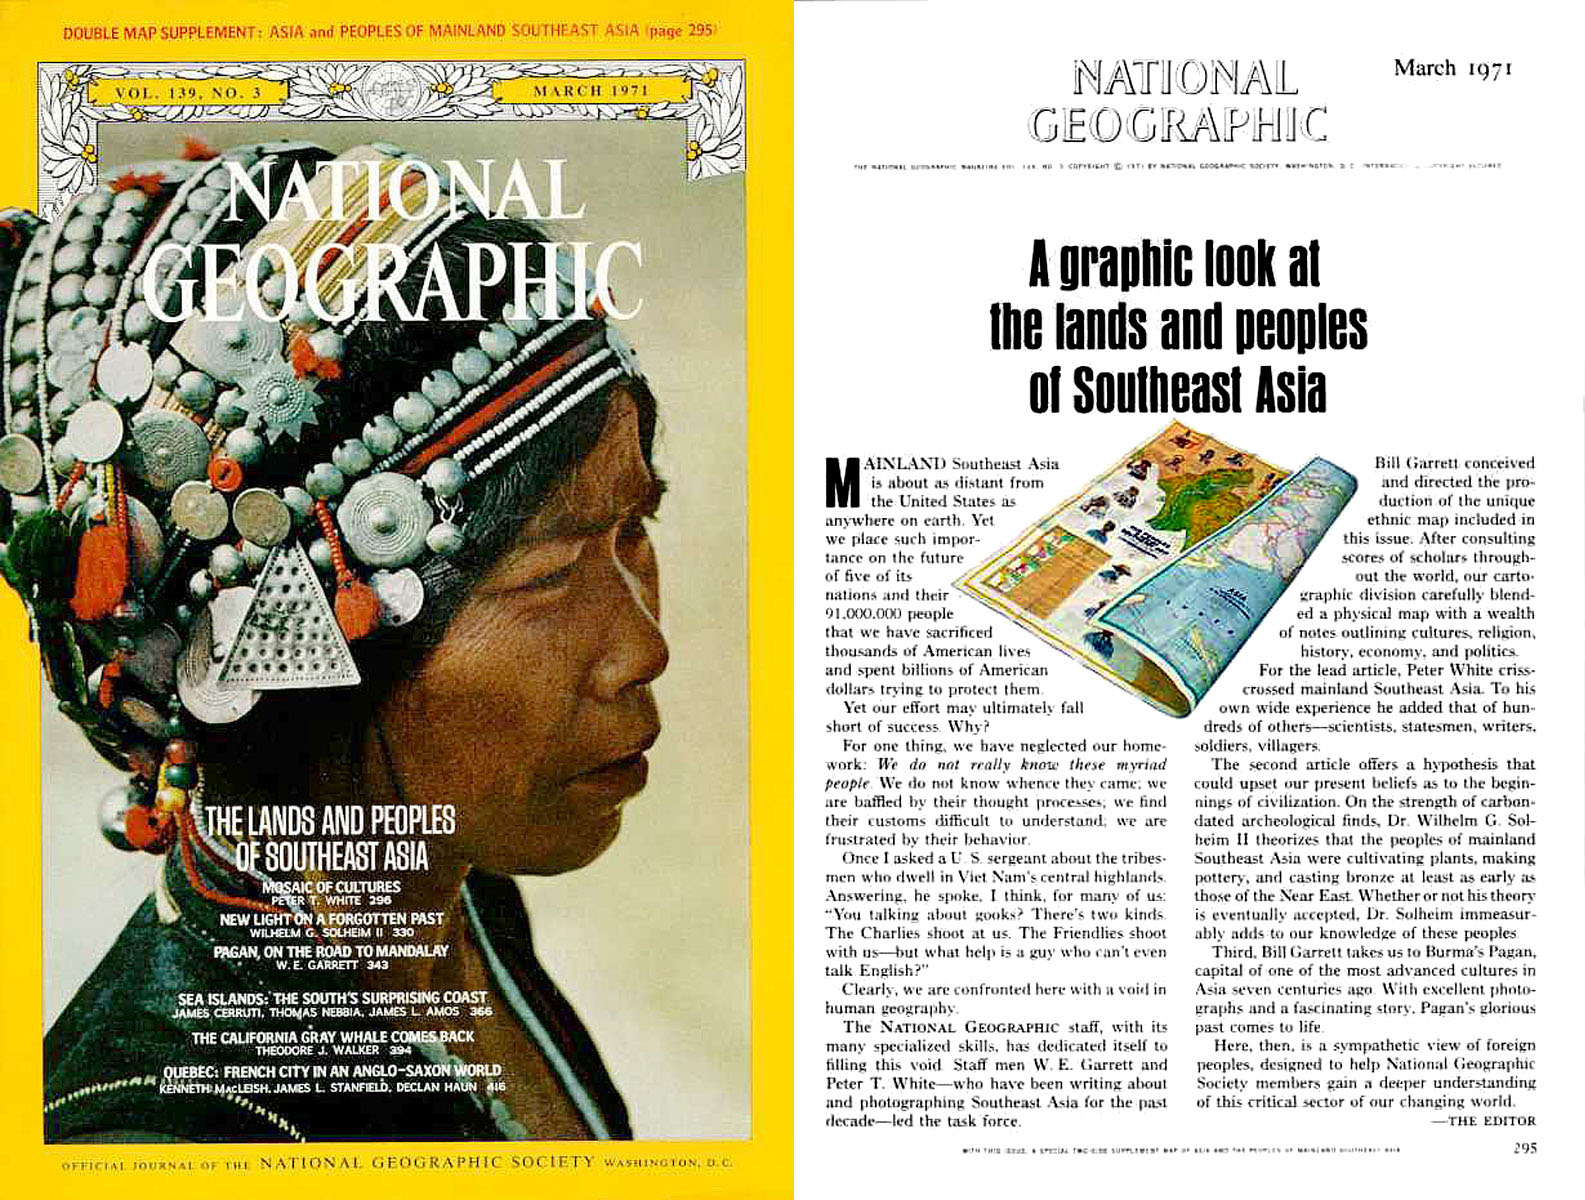 the front page of national magazine, with an article